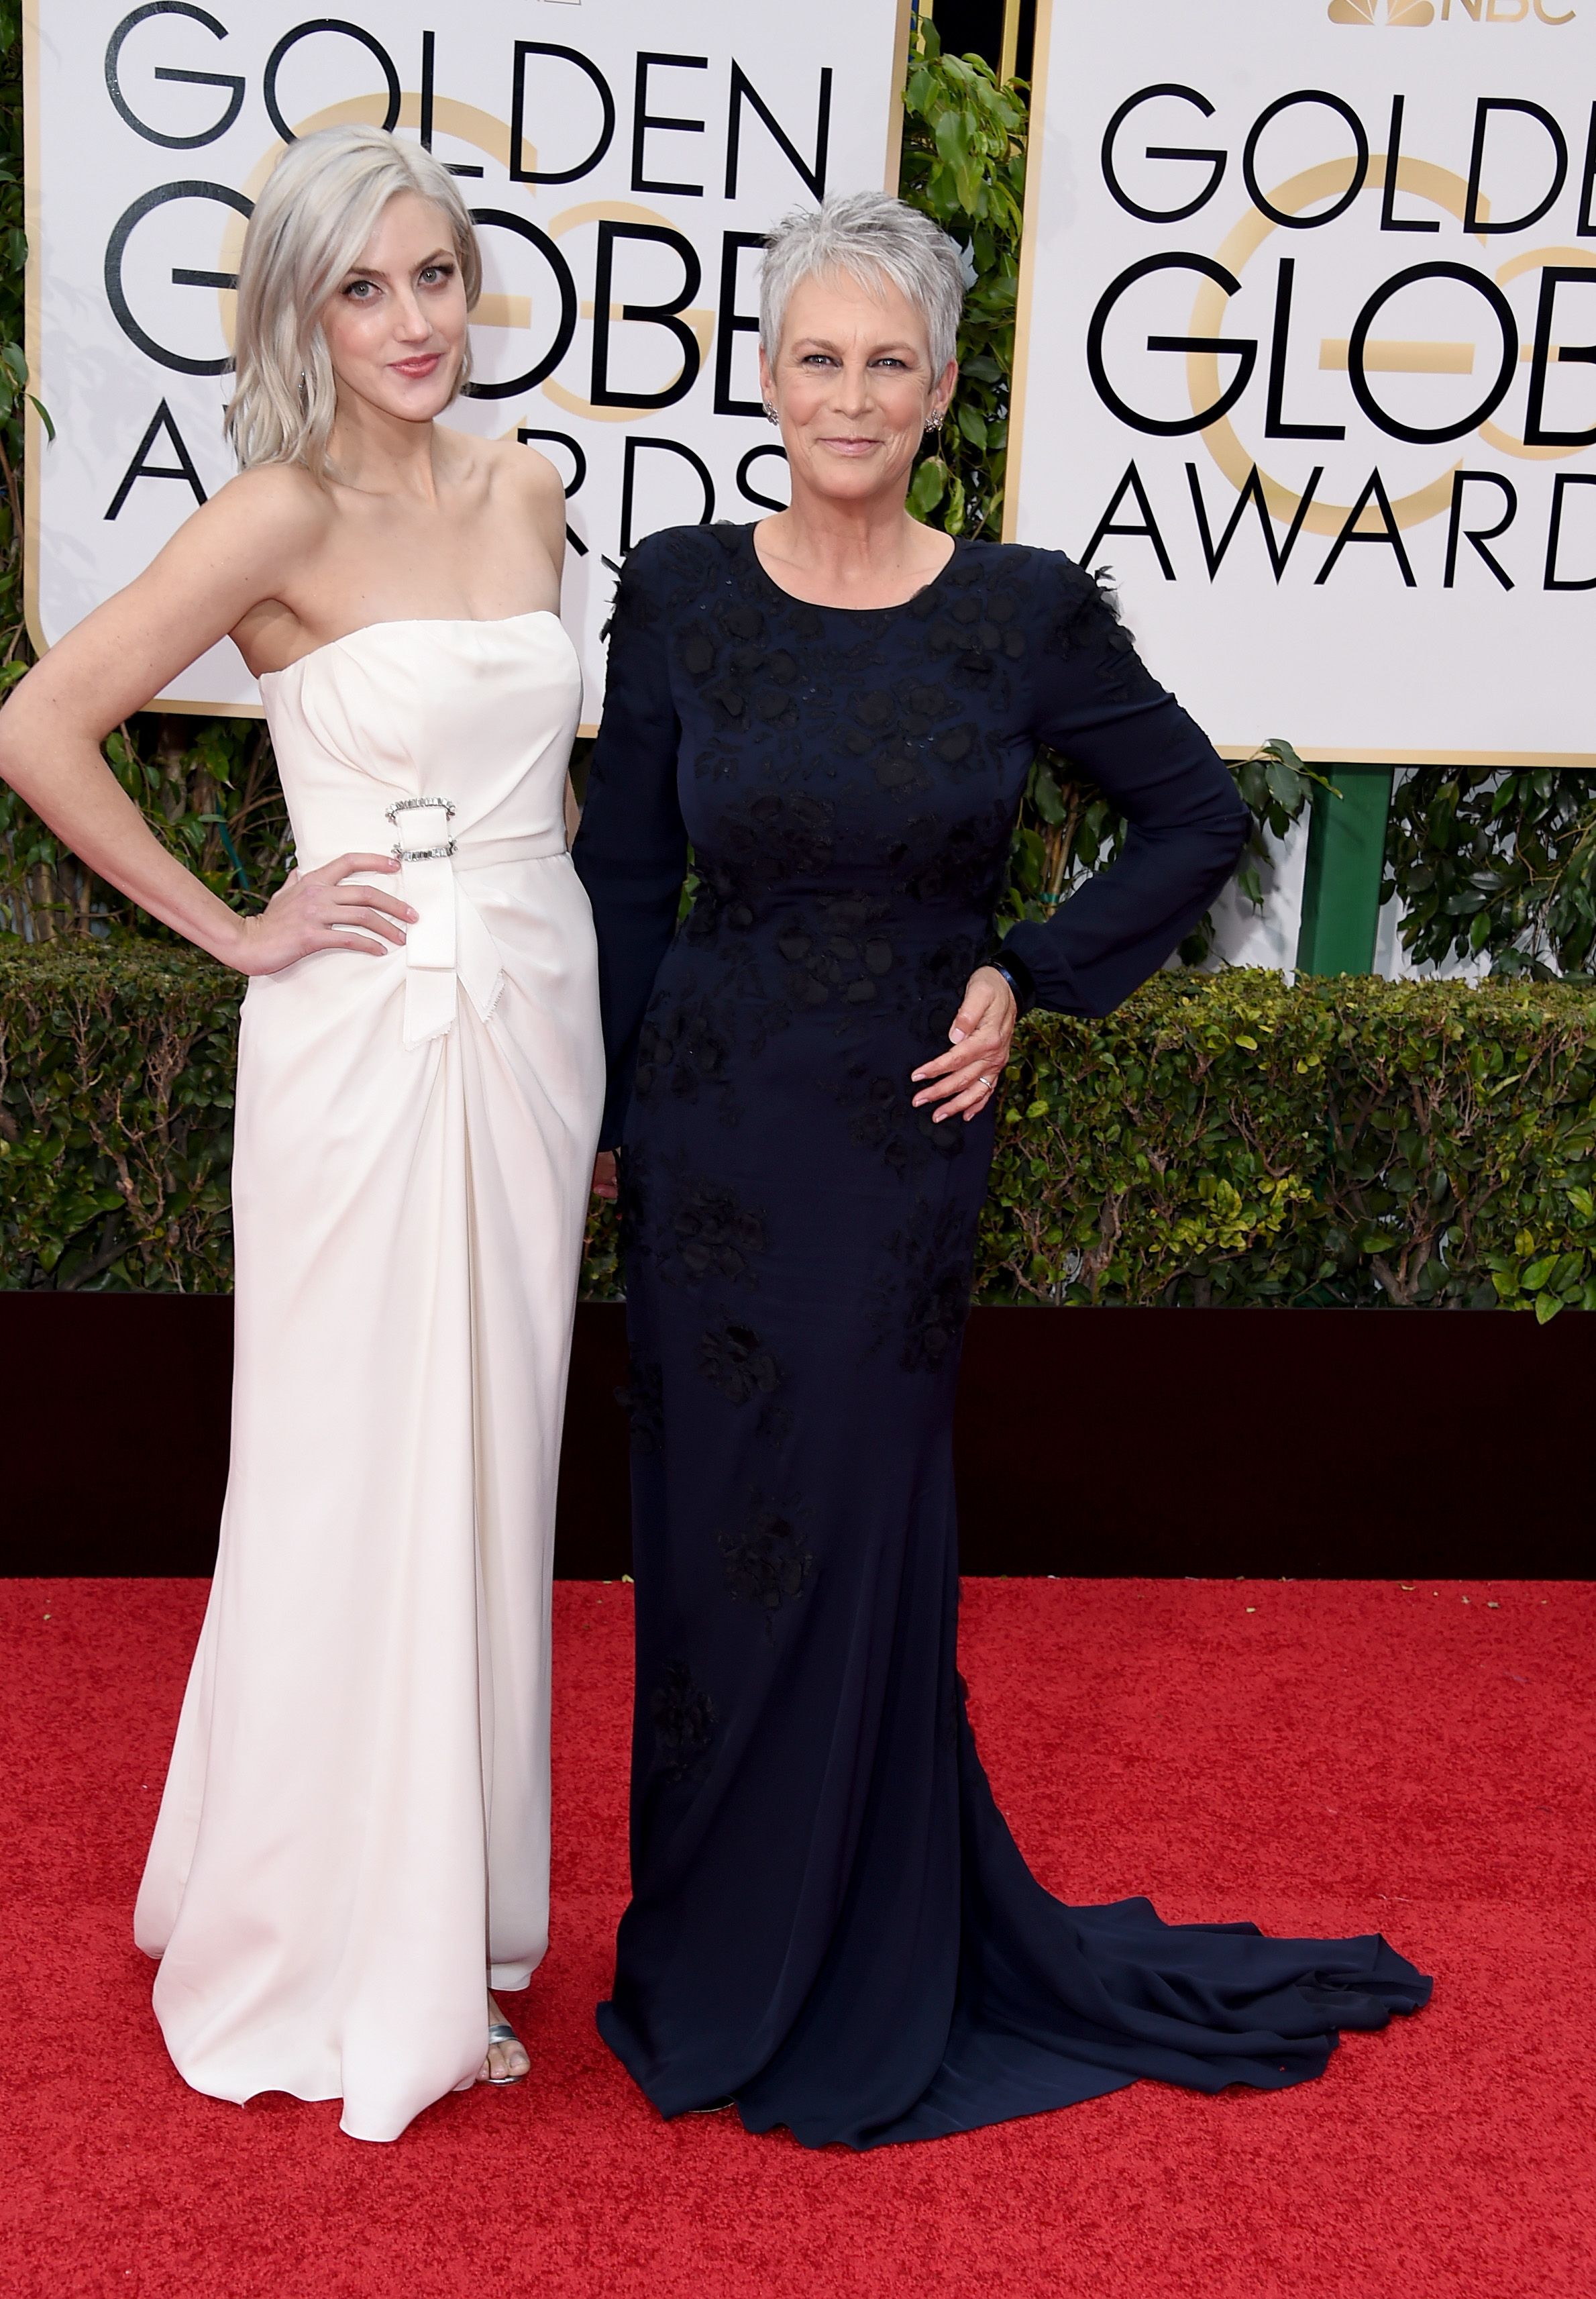 Jamie Lee Curtis Crushed the 2019 Golden Globes Red Carpet